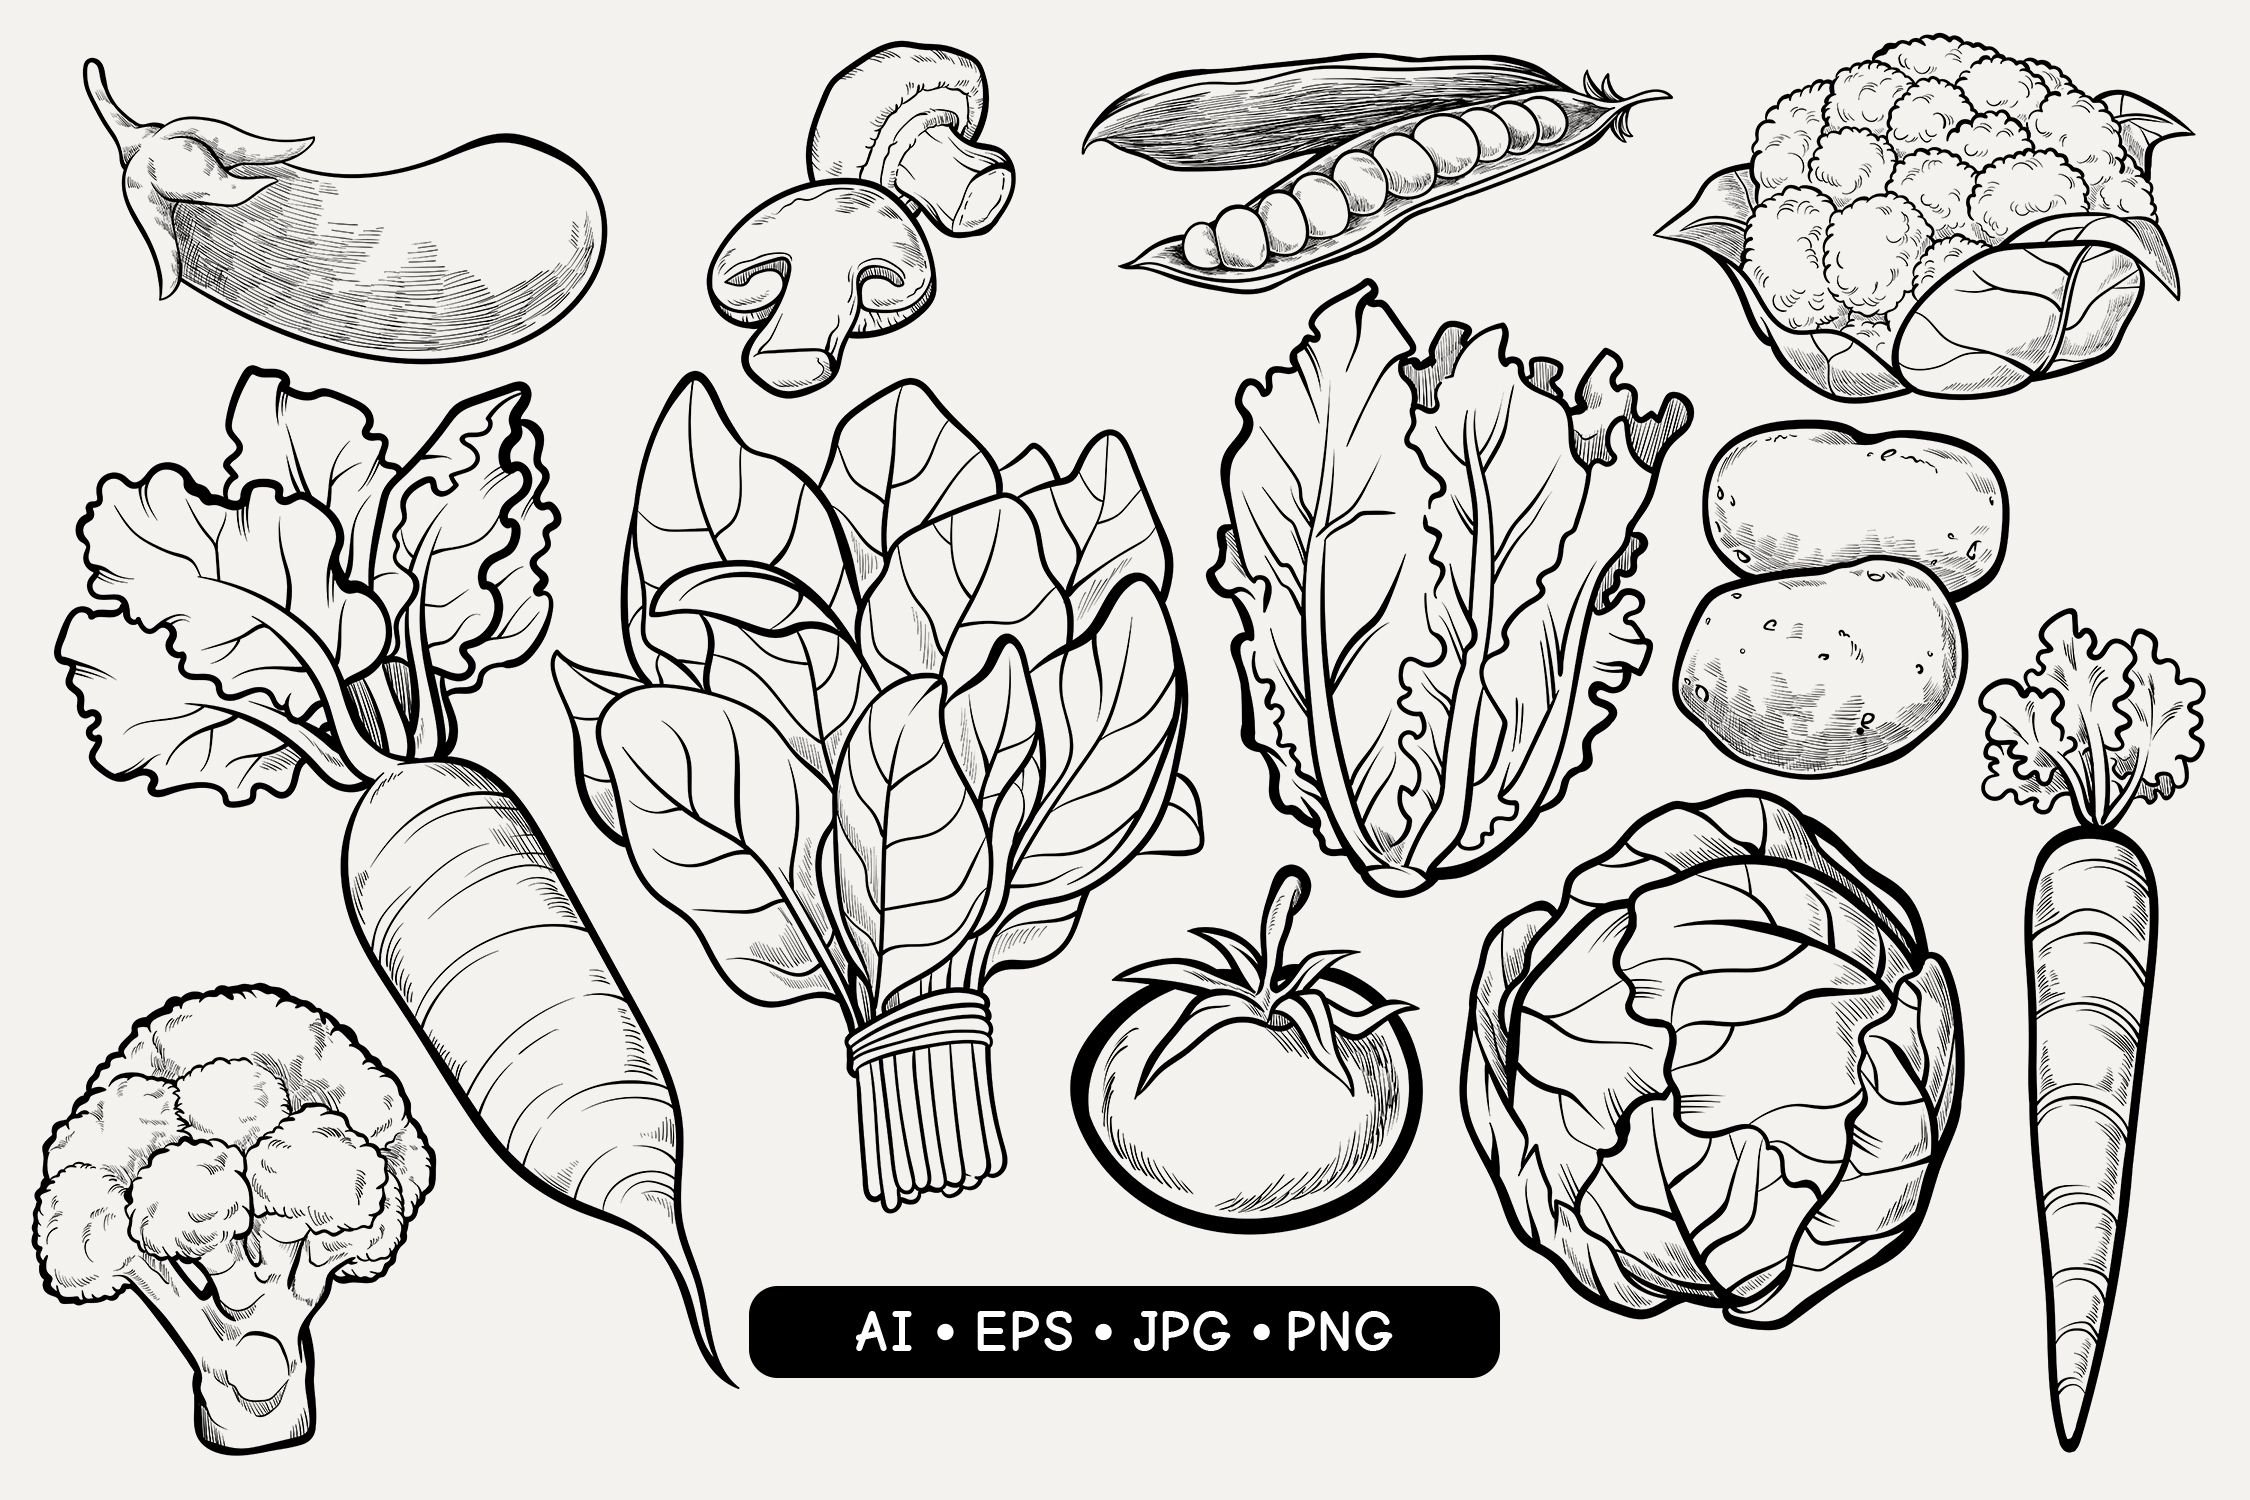 Hand Drawn Vegetables cover image.